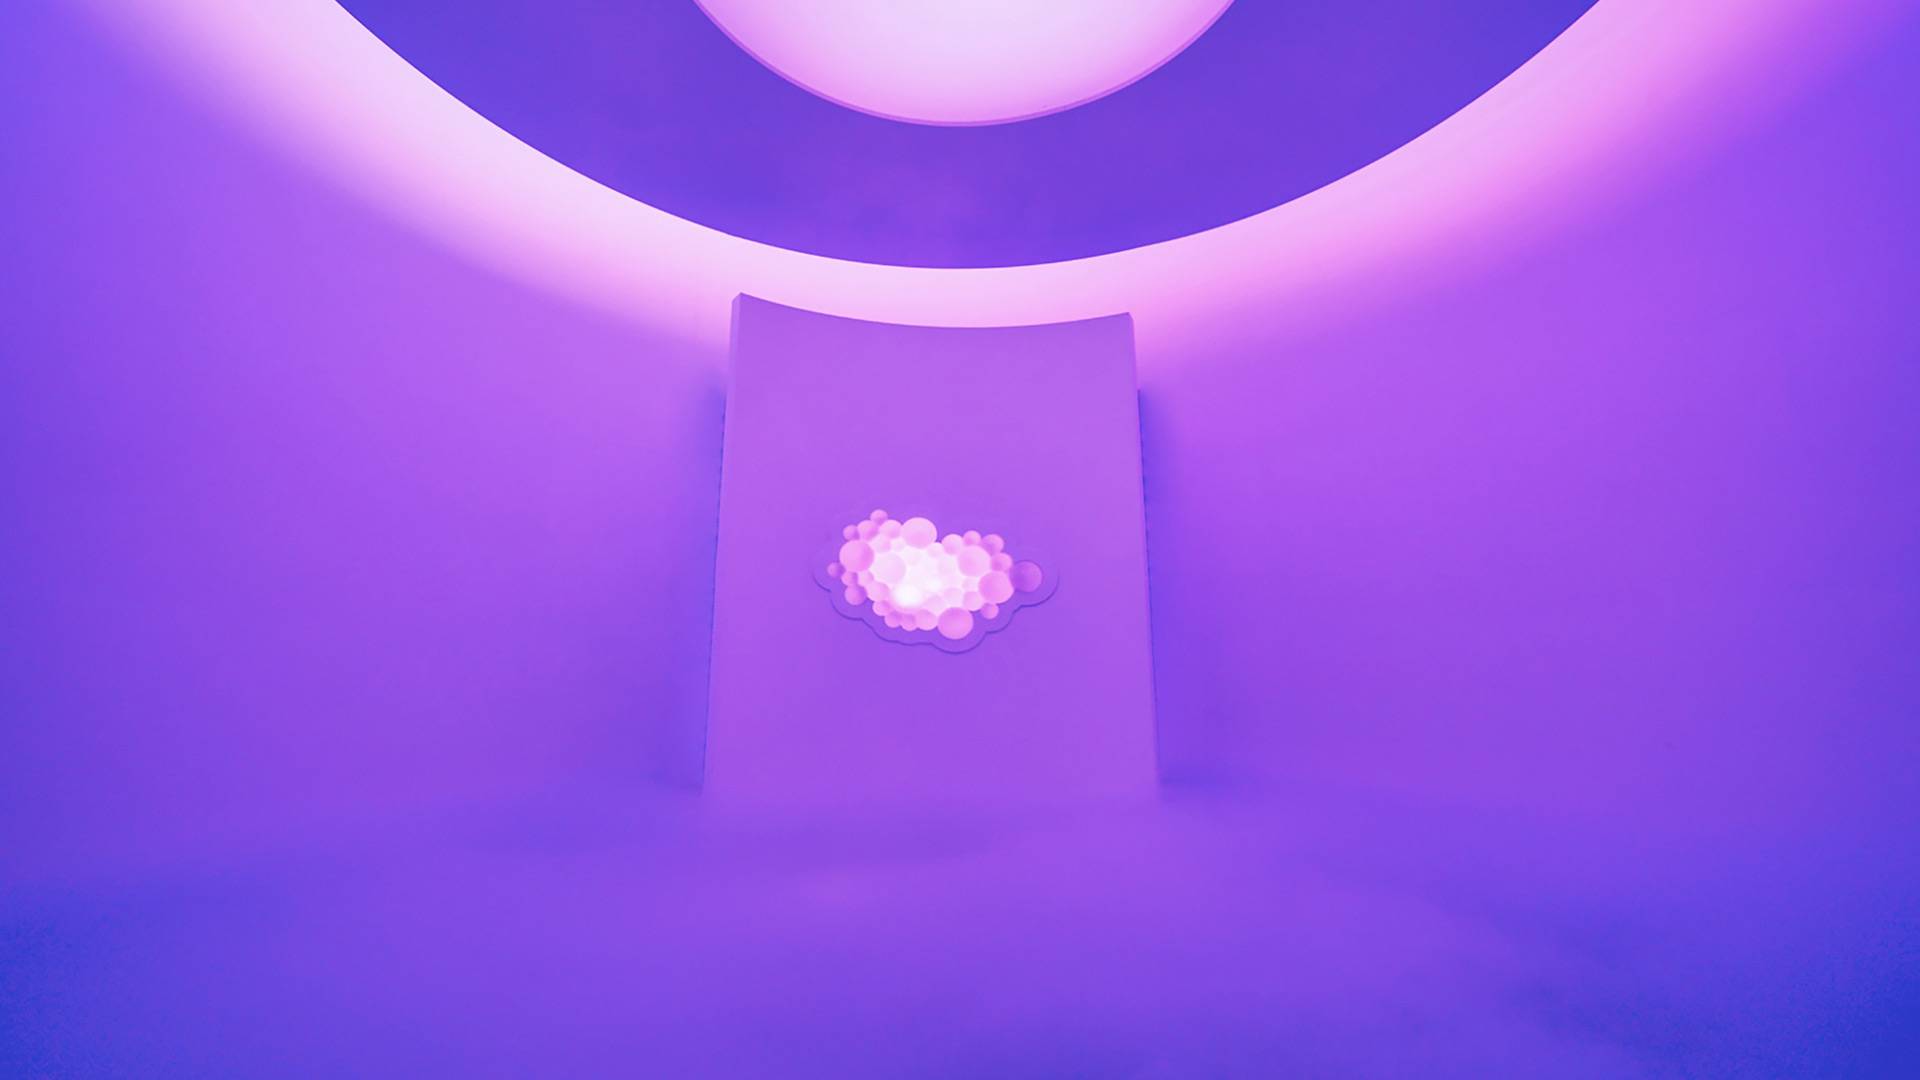 Museum of Feelings: Calm Room, meditative standing cloud room and ambient light installation